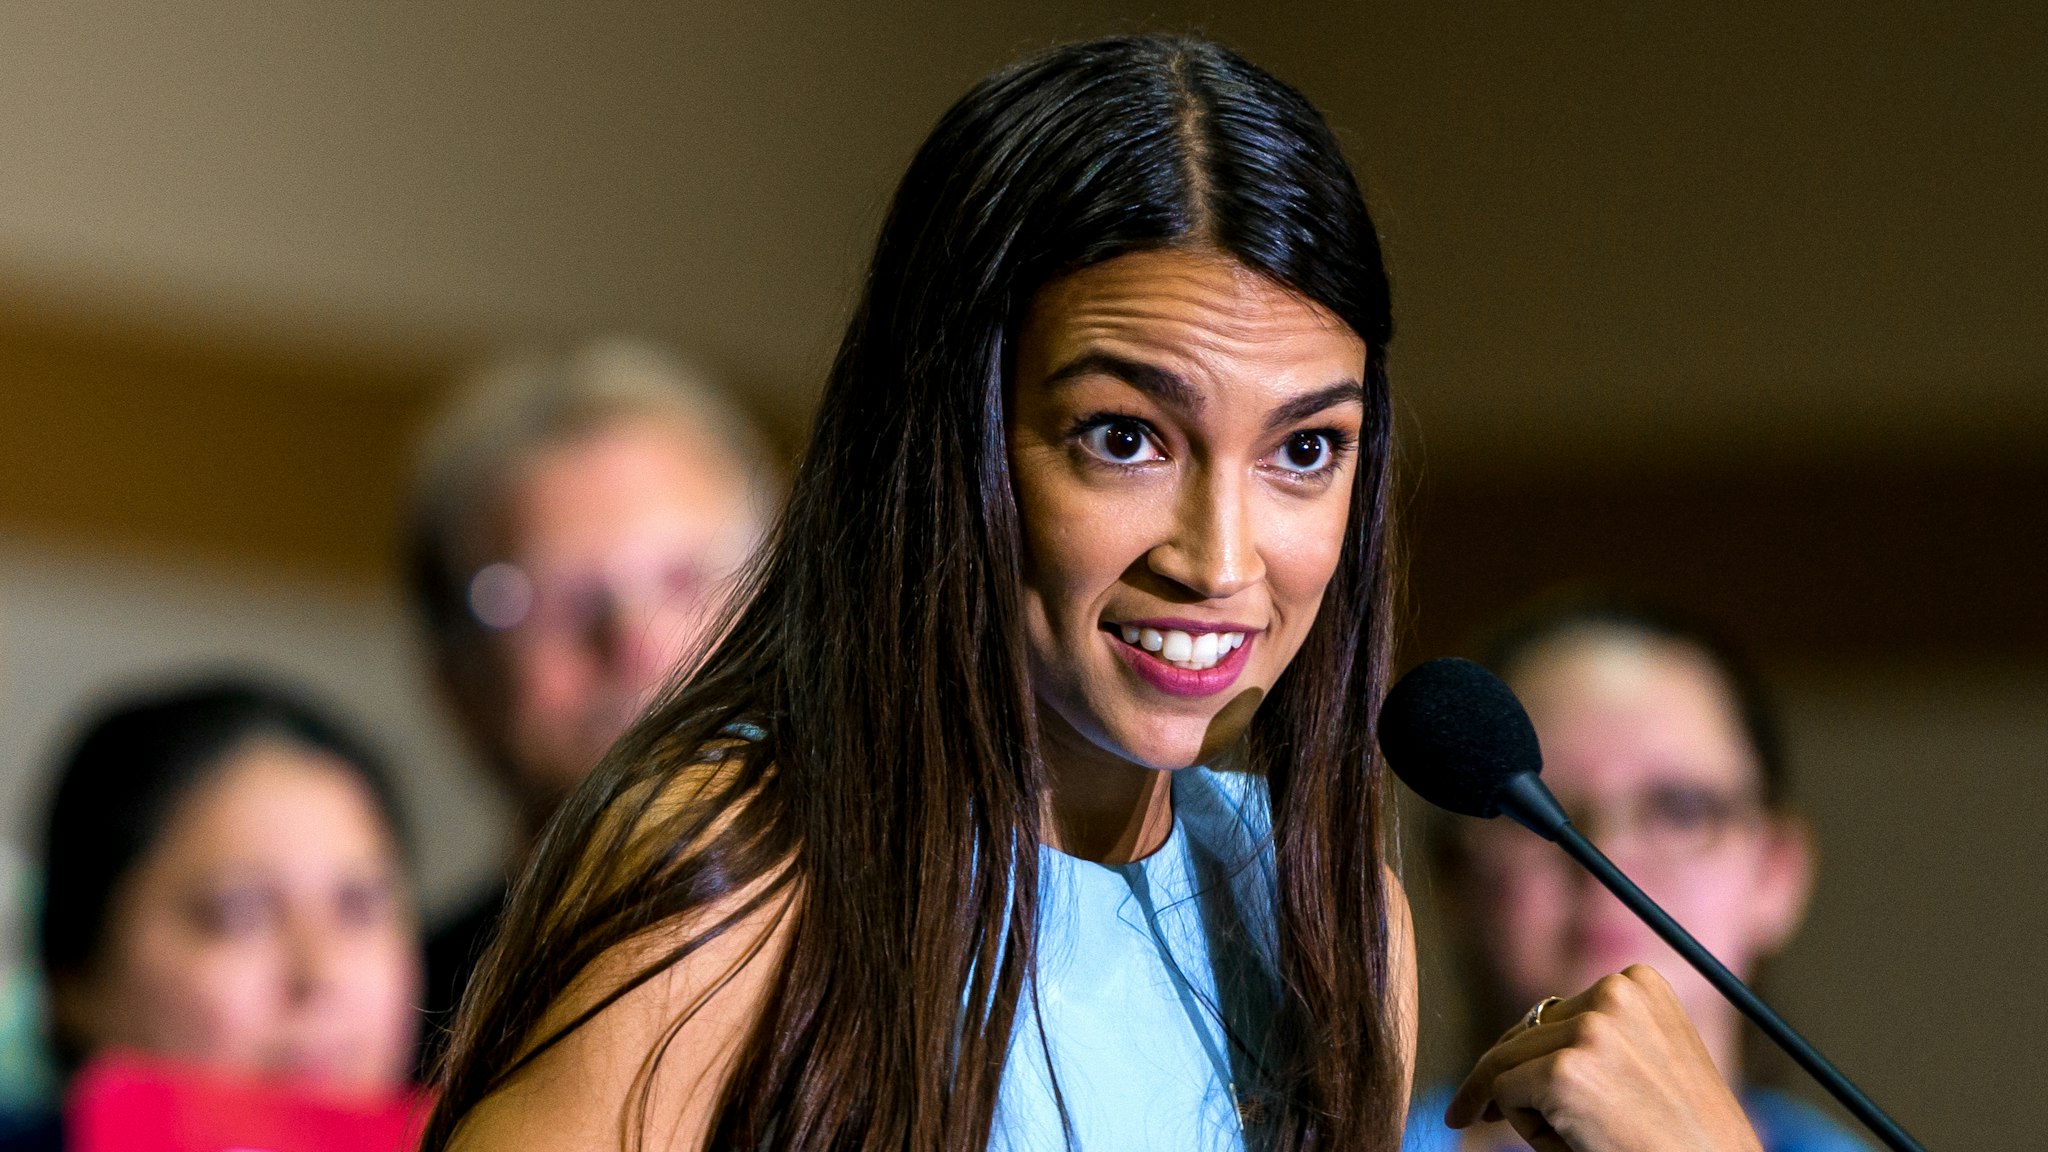 Alexandria Ocasio-Cortez speaks in support of Brent Welder during a rally at The Reardon Convention Center on Friday, July 20, 2018 in Kansas City, KS.